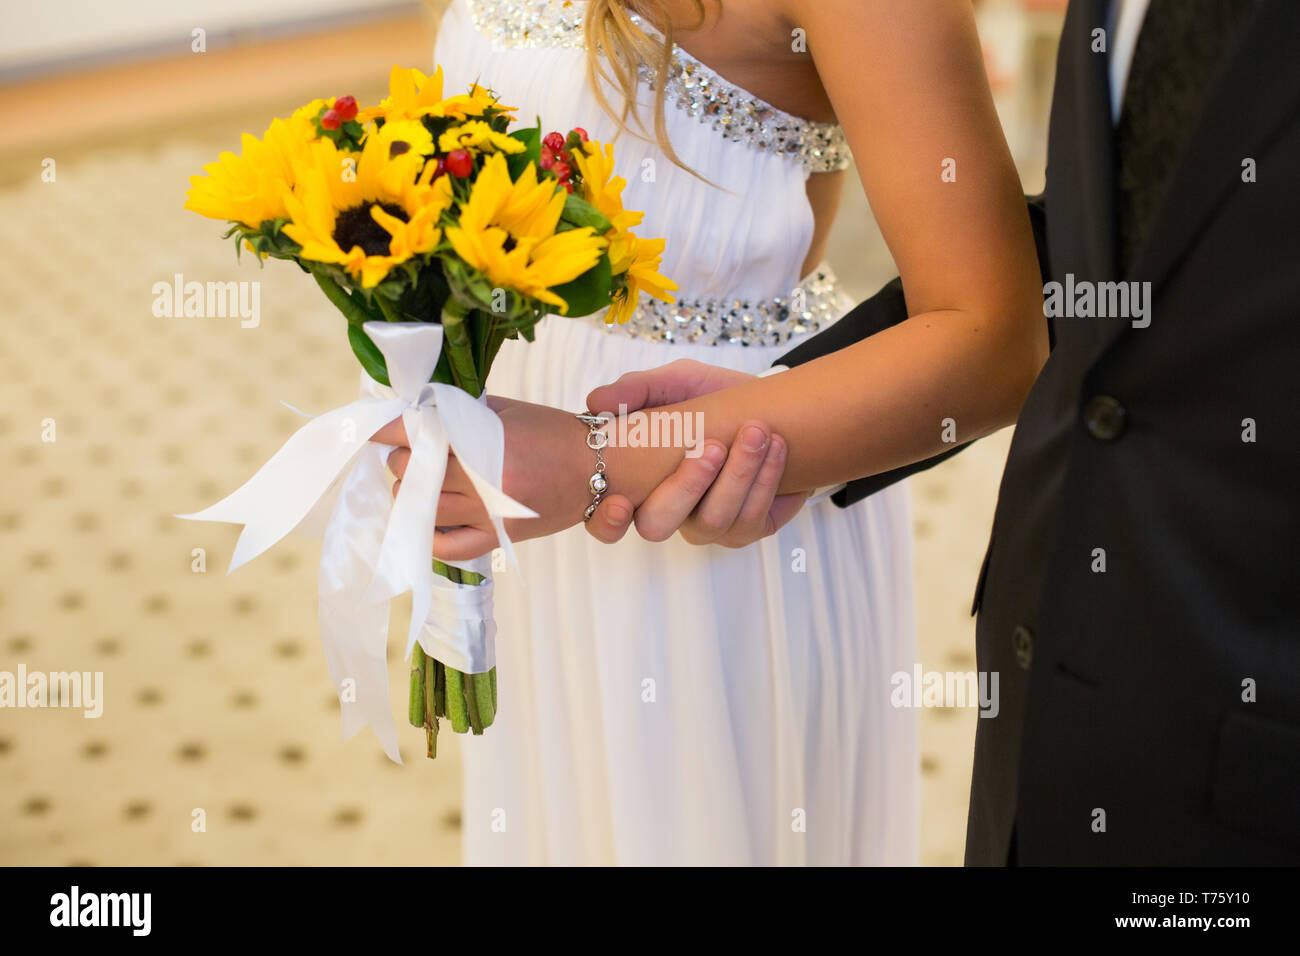 A miniature bouquet of flowers of a sunflower, supplemented with red hypericum berries, in the hands of an unrecognizable bride and groom Stock Photo